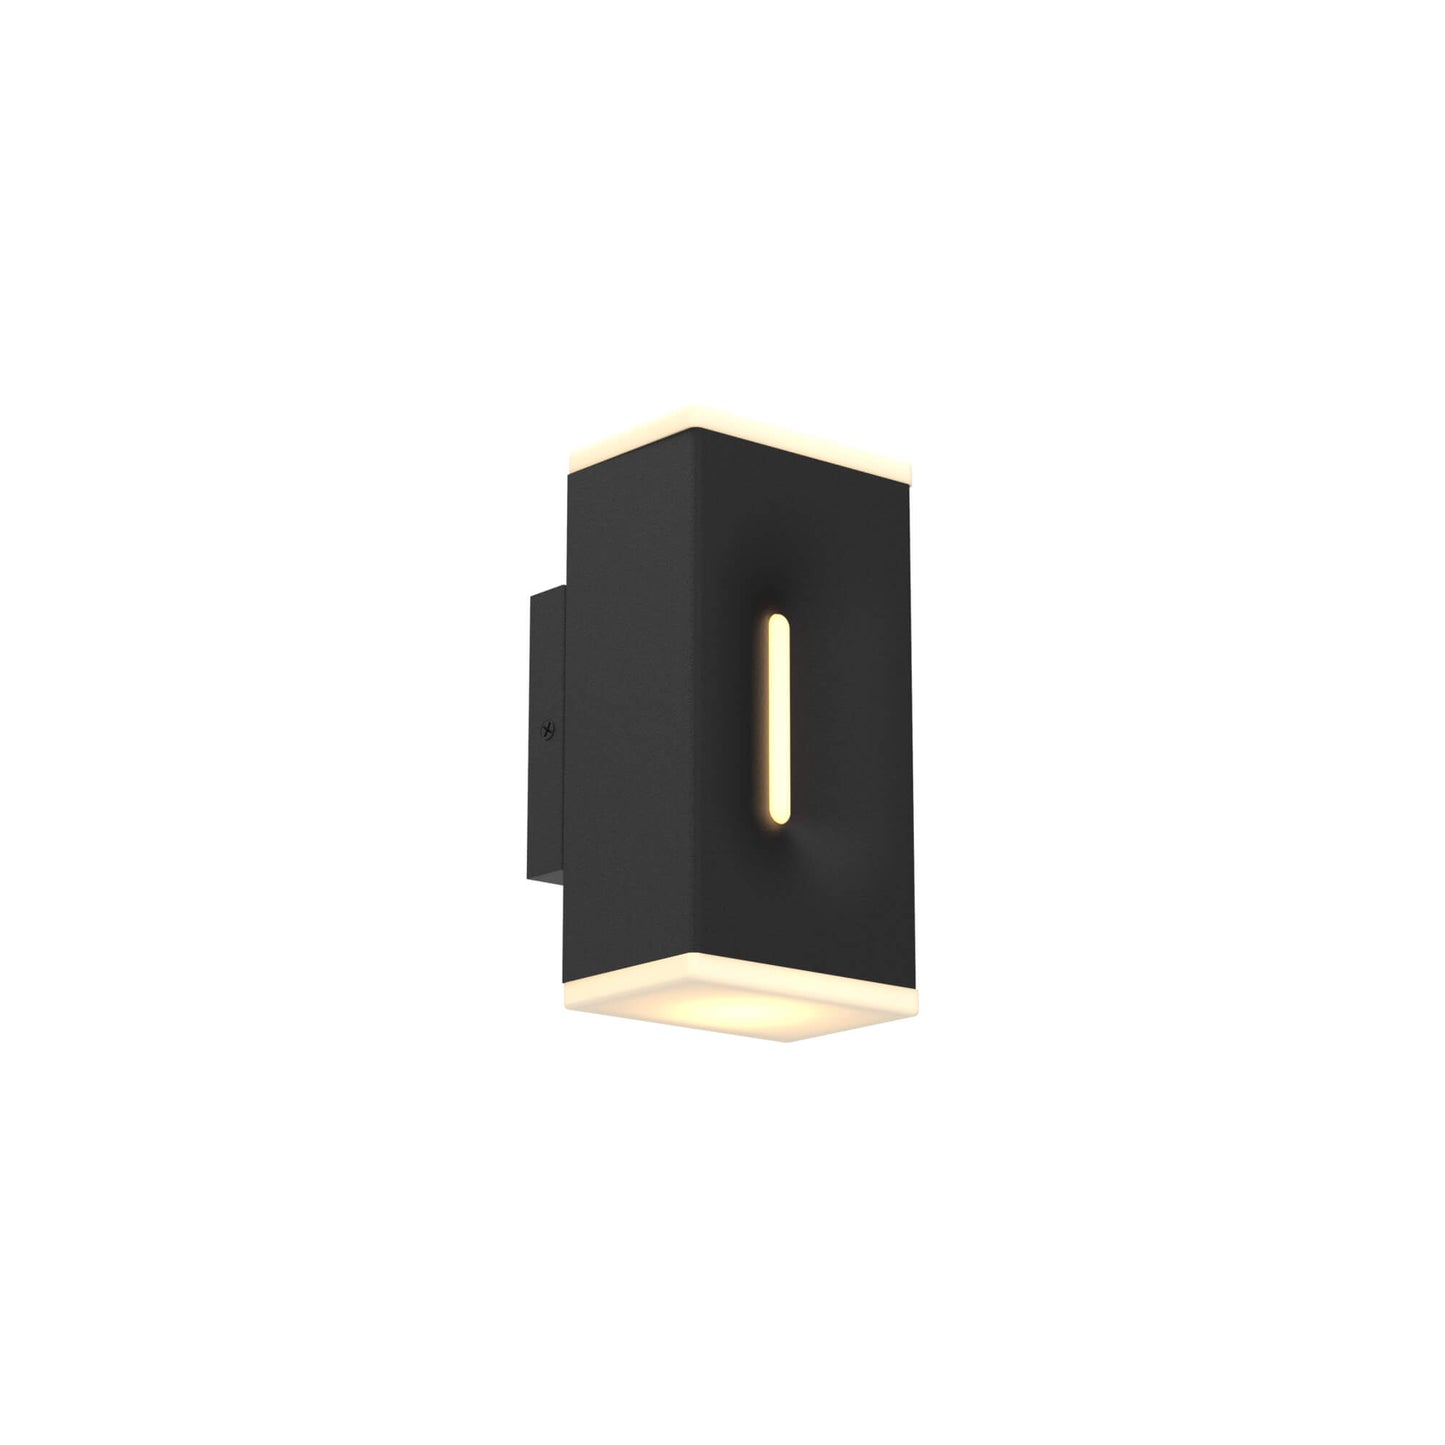 LED Vertical Wall Sconce